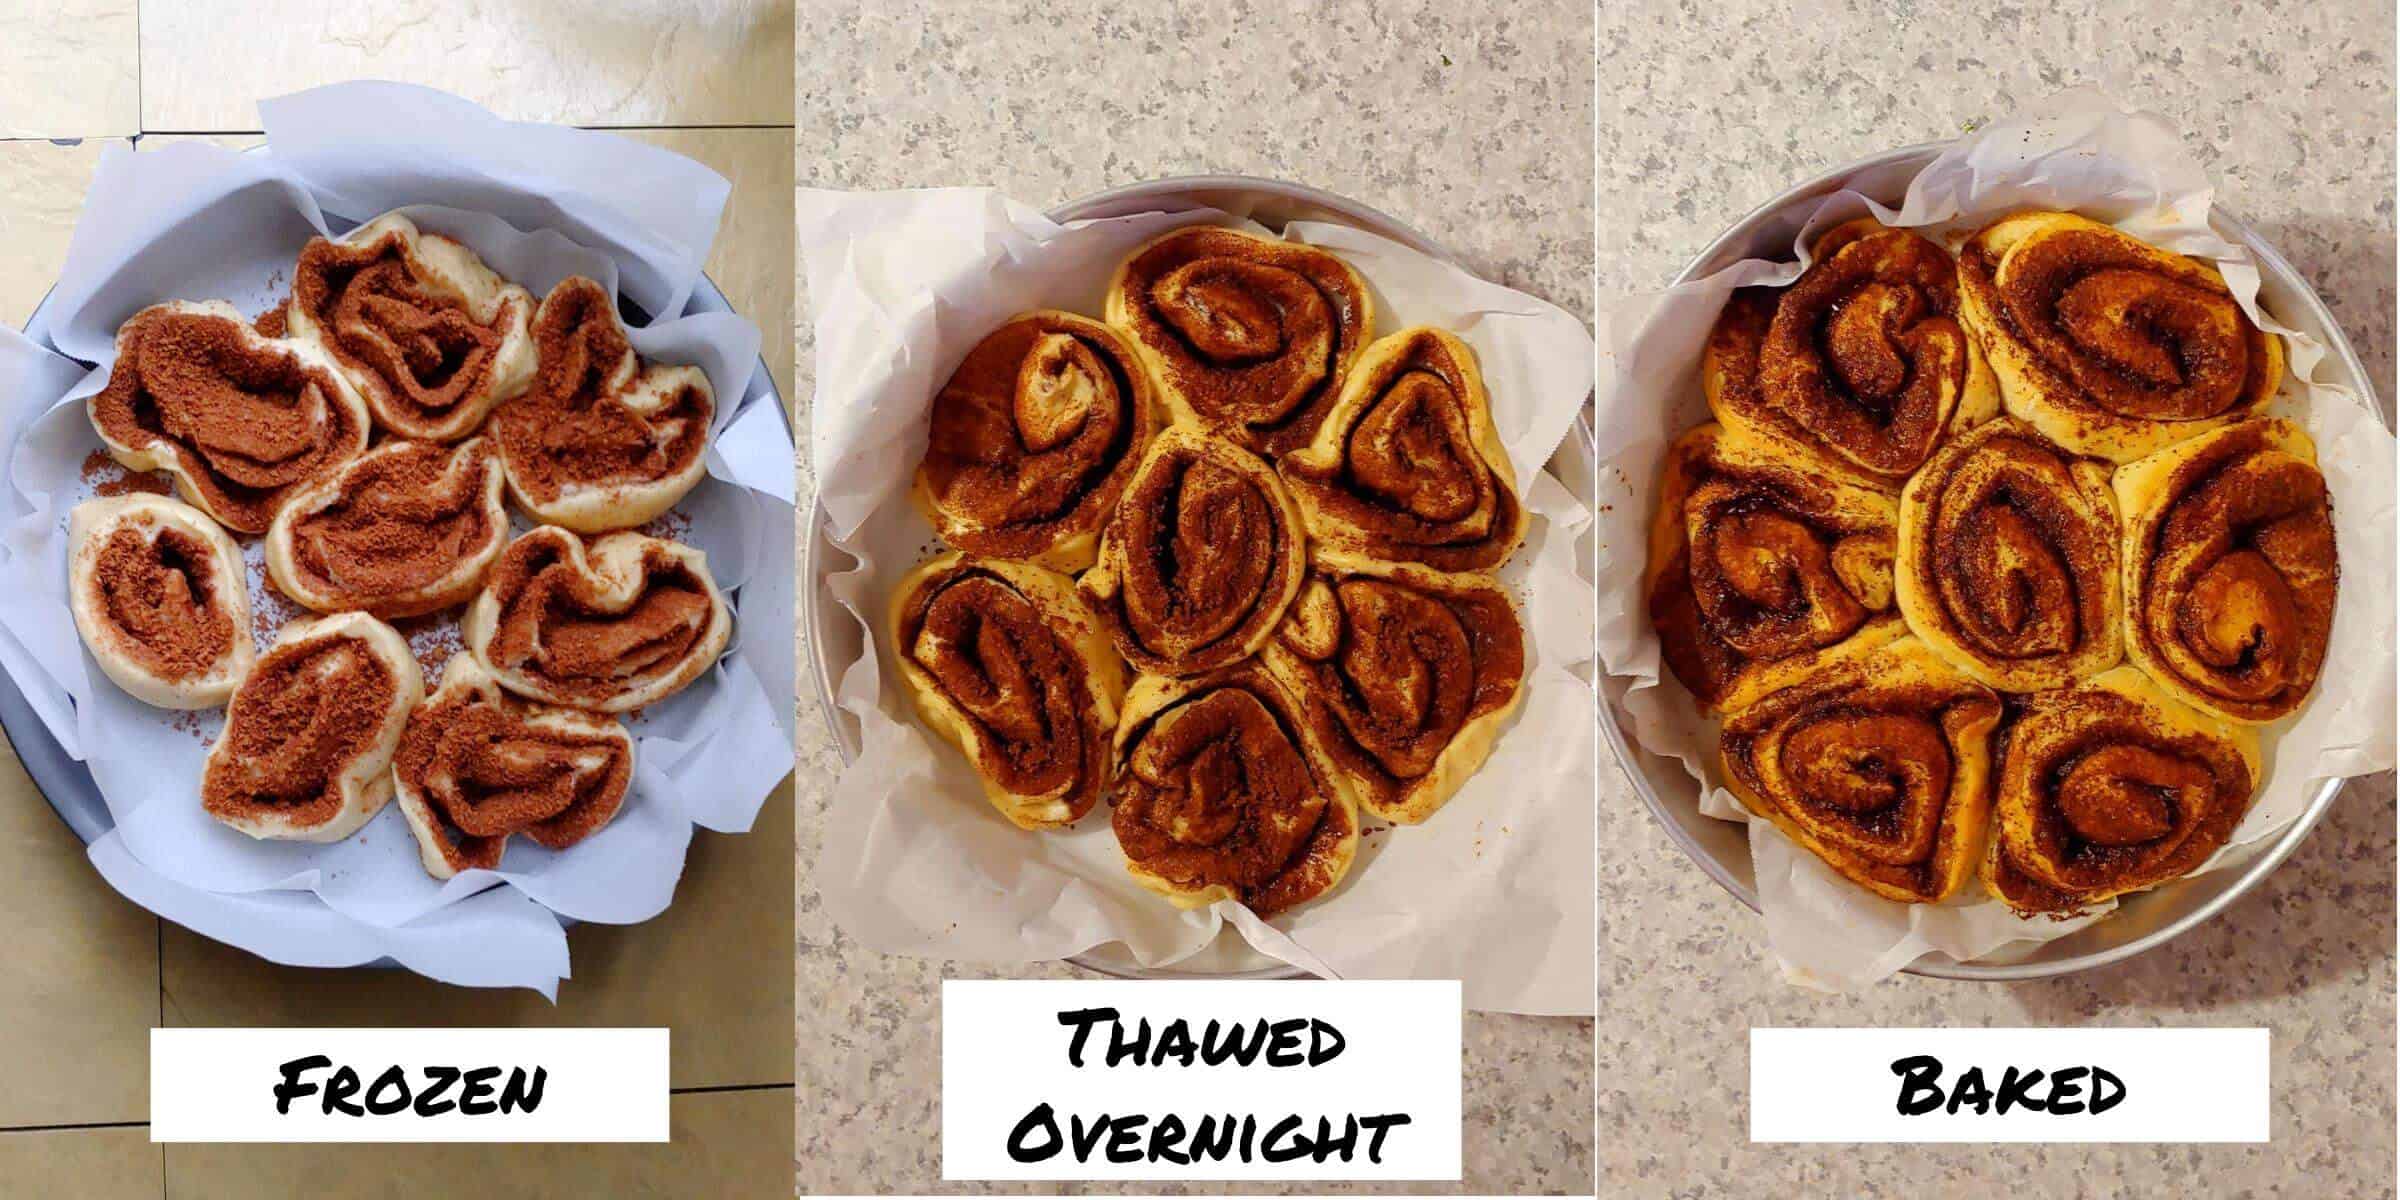 a collage of cinnamon rolls that are frozen, thawed overnight in the refrigerator, and baked